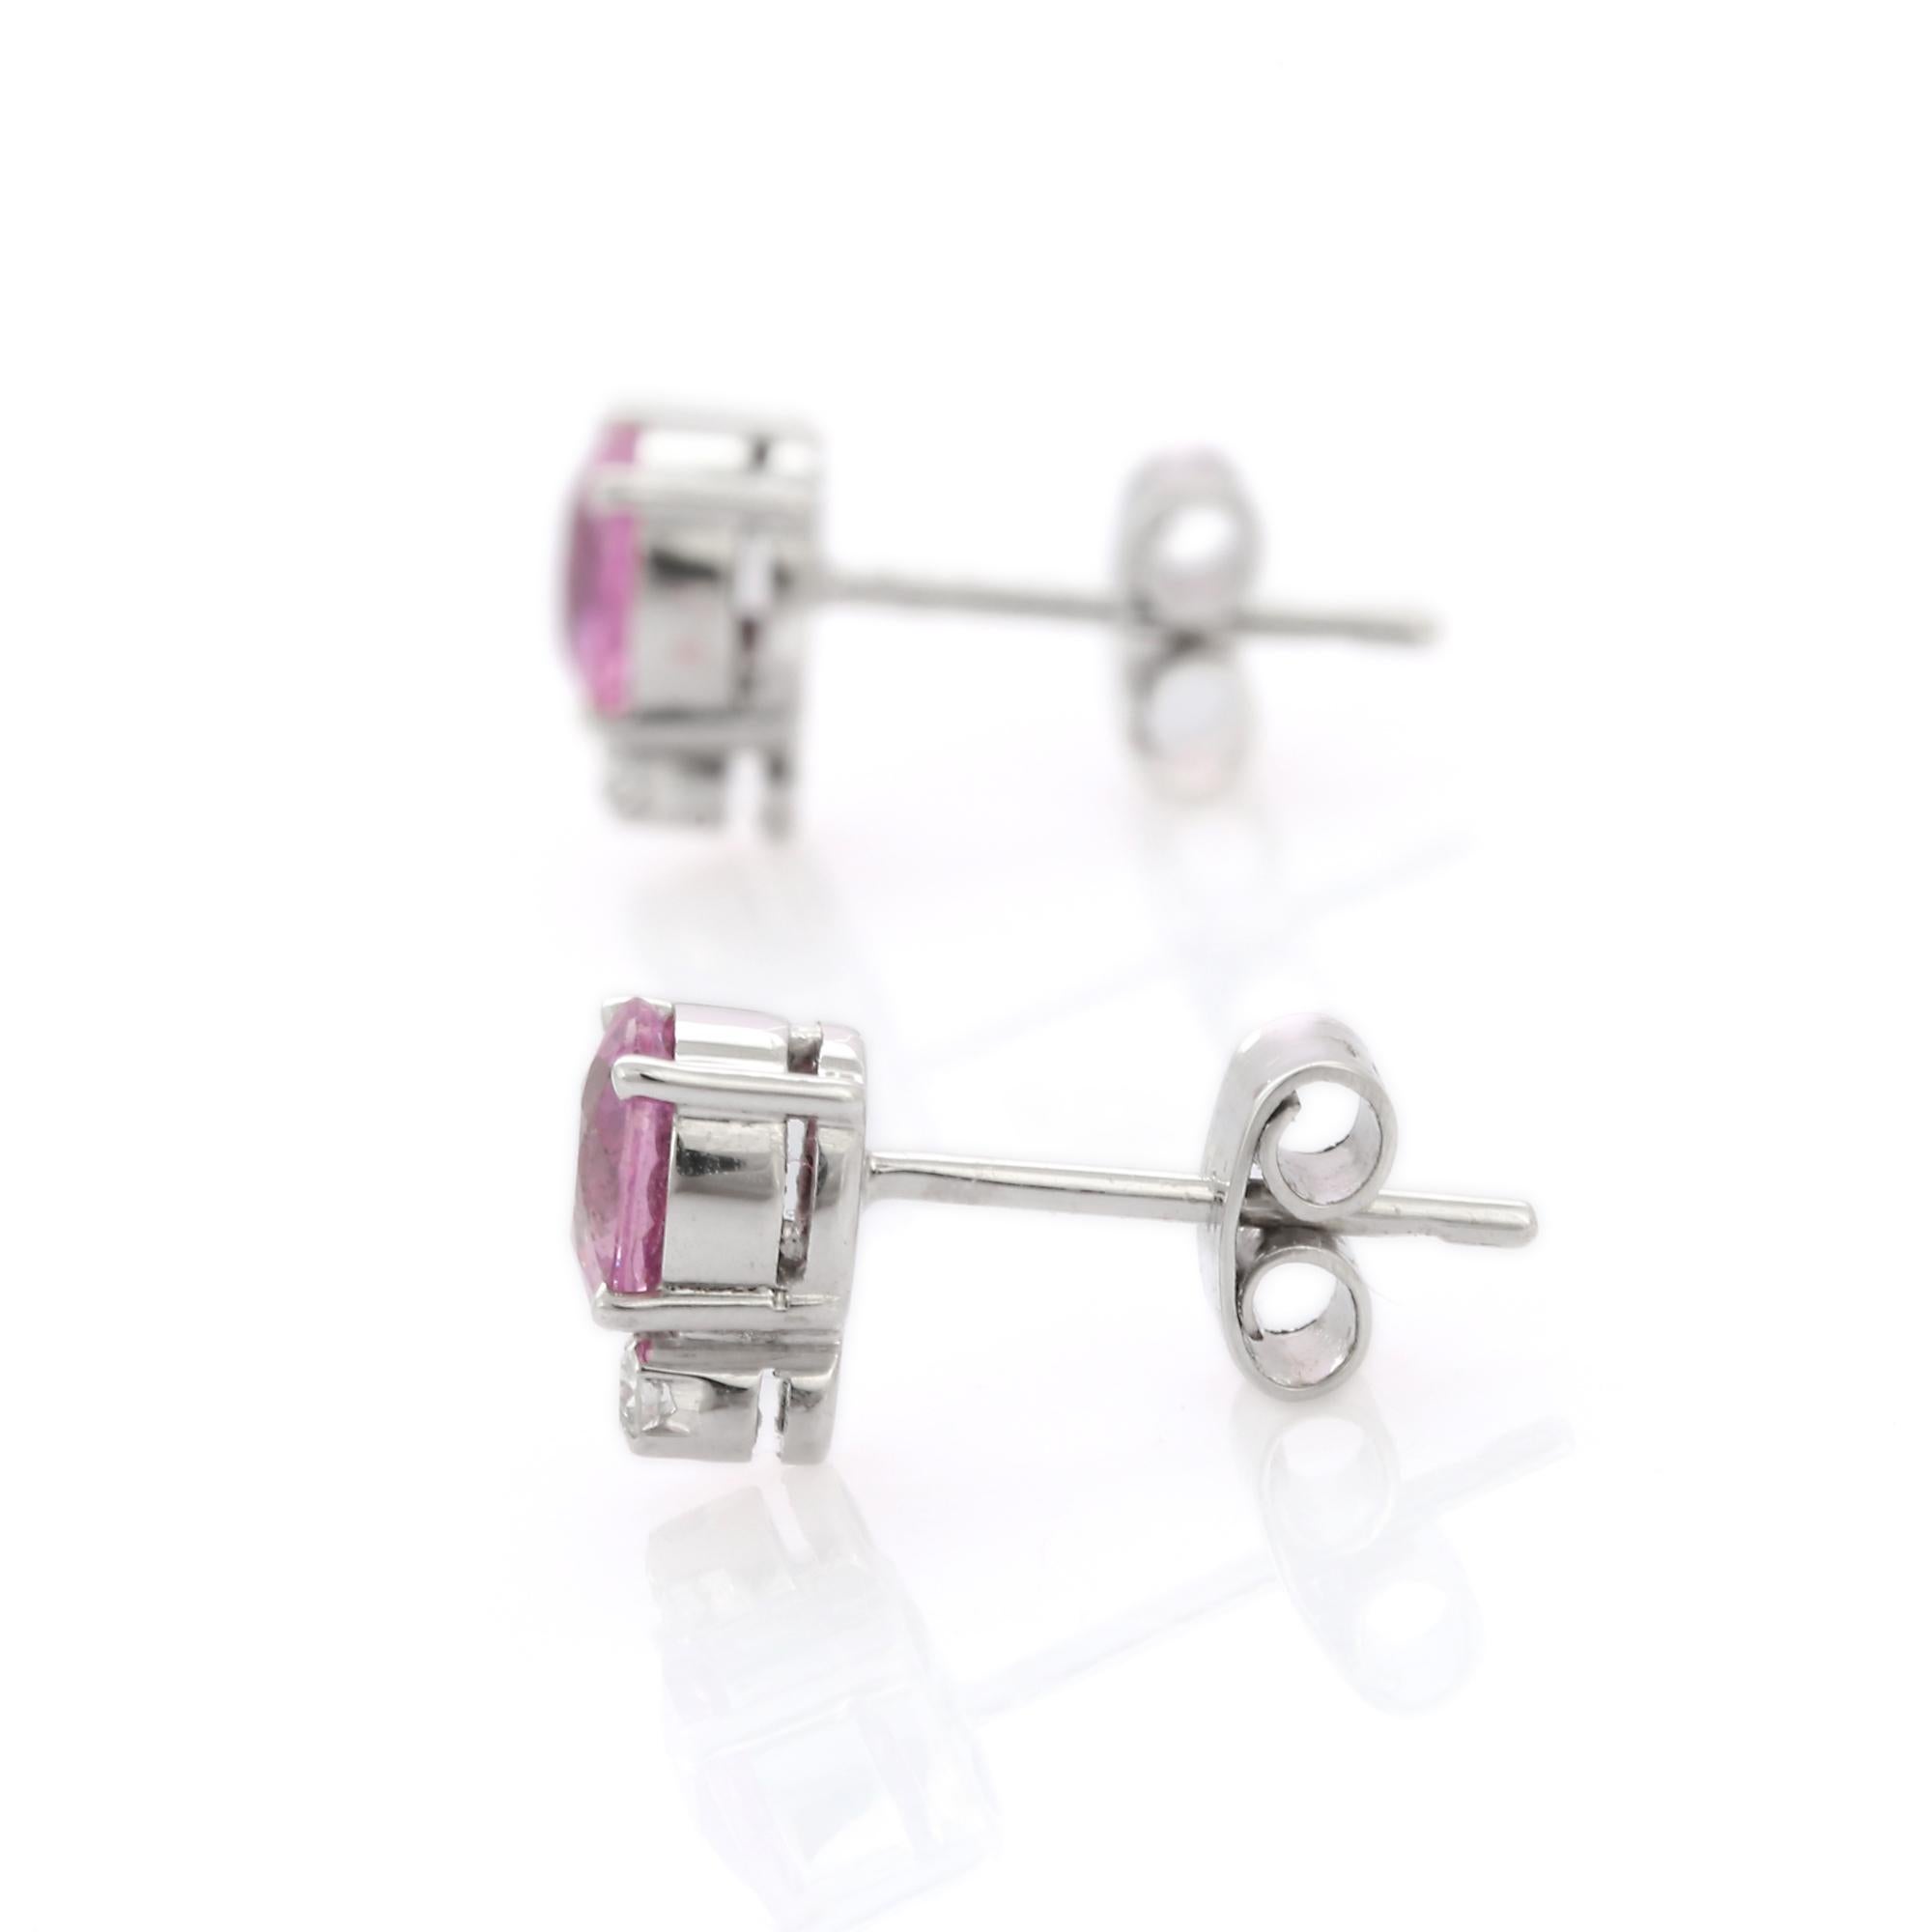 Round Cut 1.54 Carat Round Pink Sapphire Stud Earring in 18K Solid White Gold with Diamond For Sale